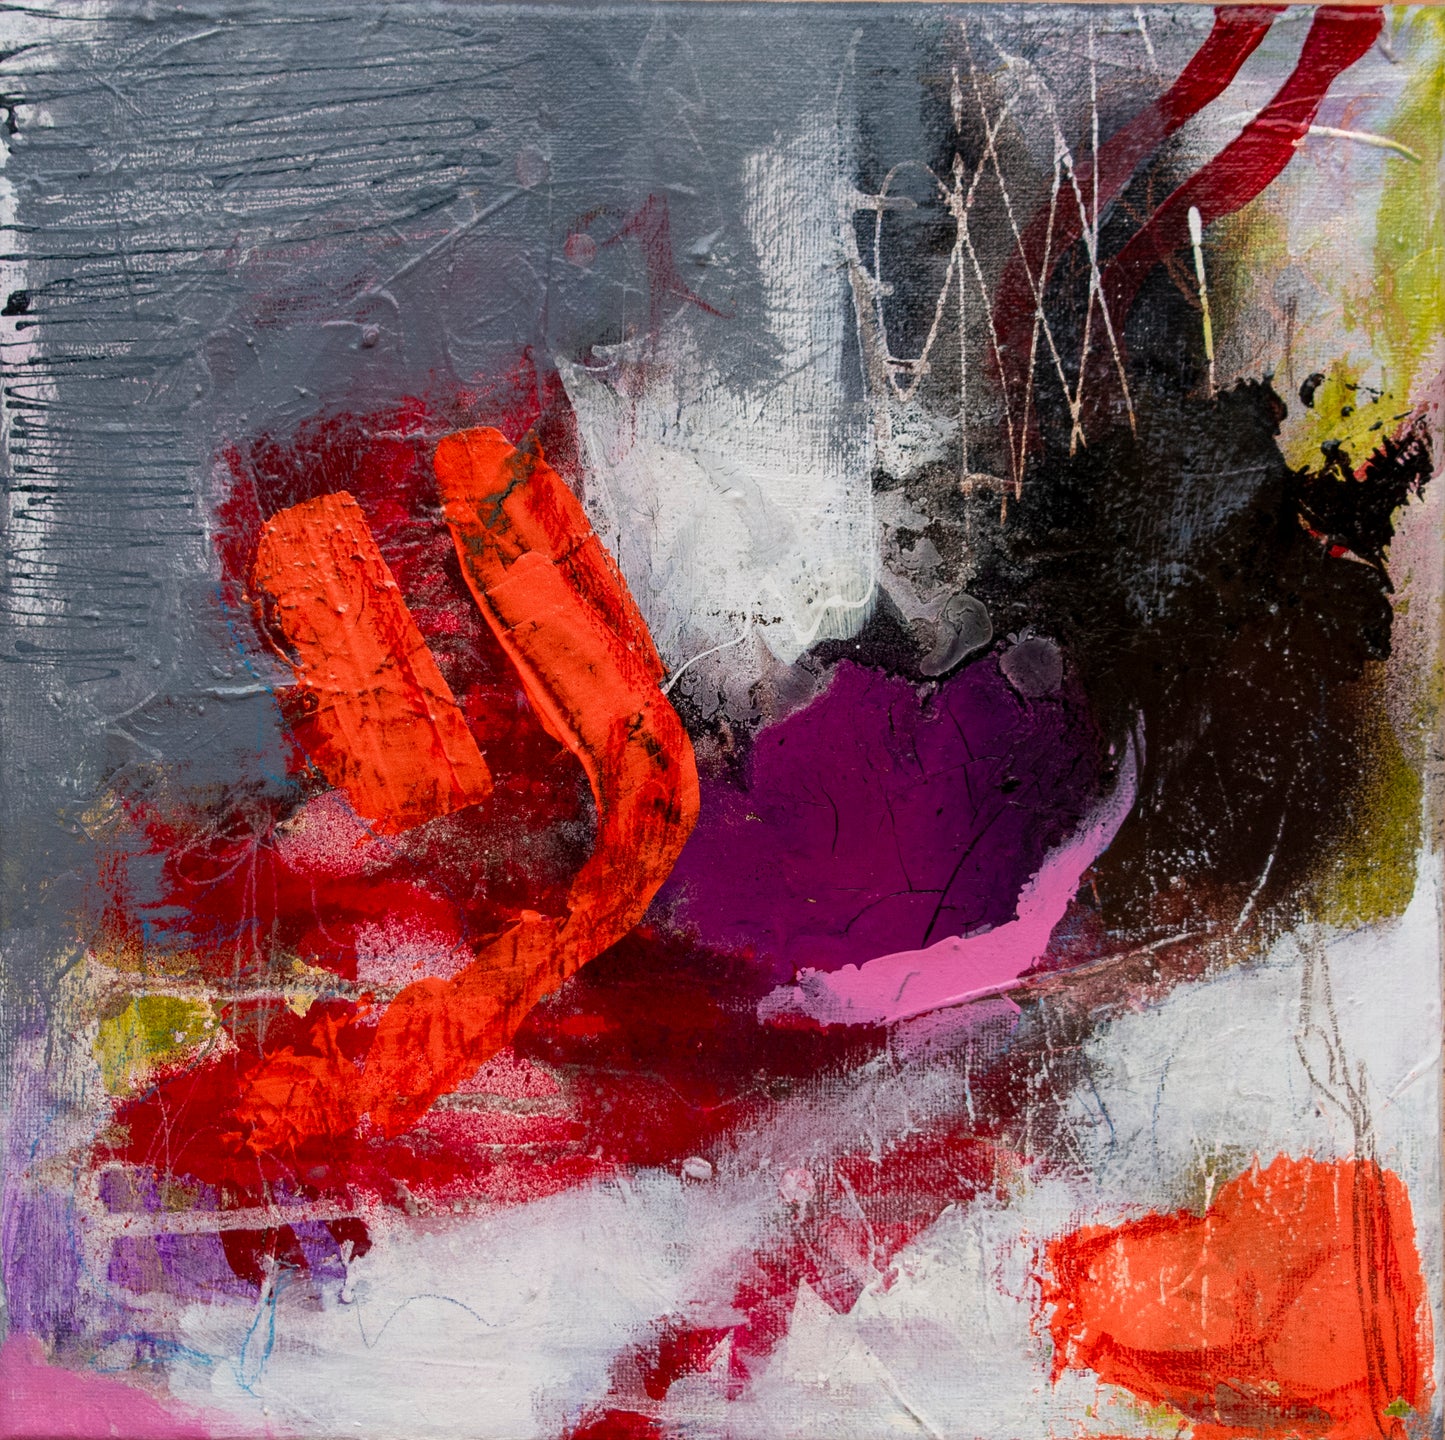 Colorful abstract painting using acrylic paint titled 'Break Free II' by artist Steffi Möllers; measures 12"x12"